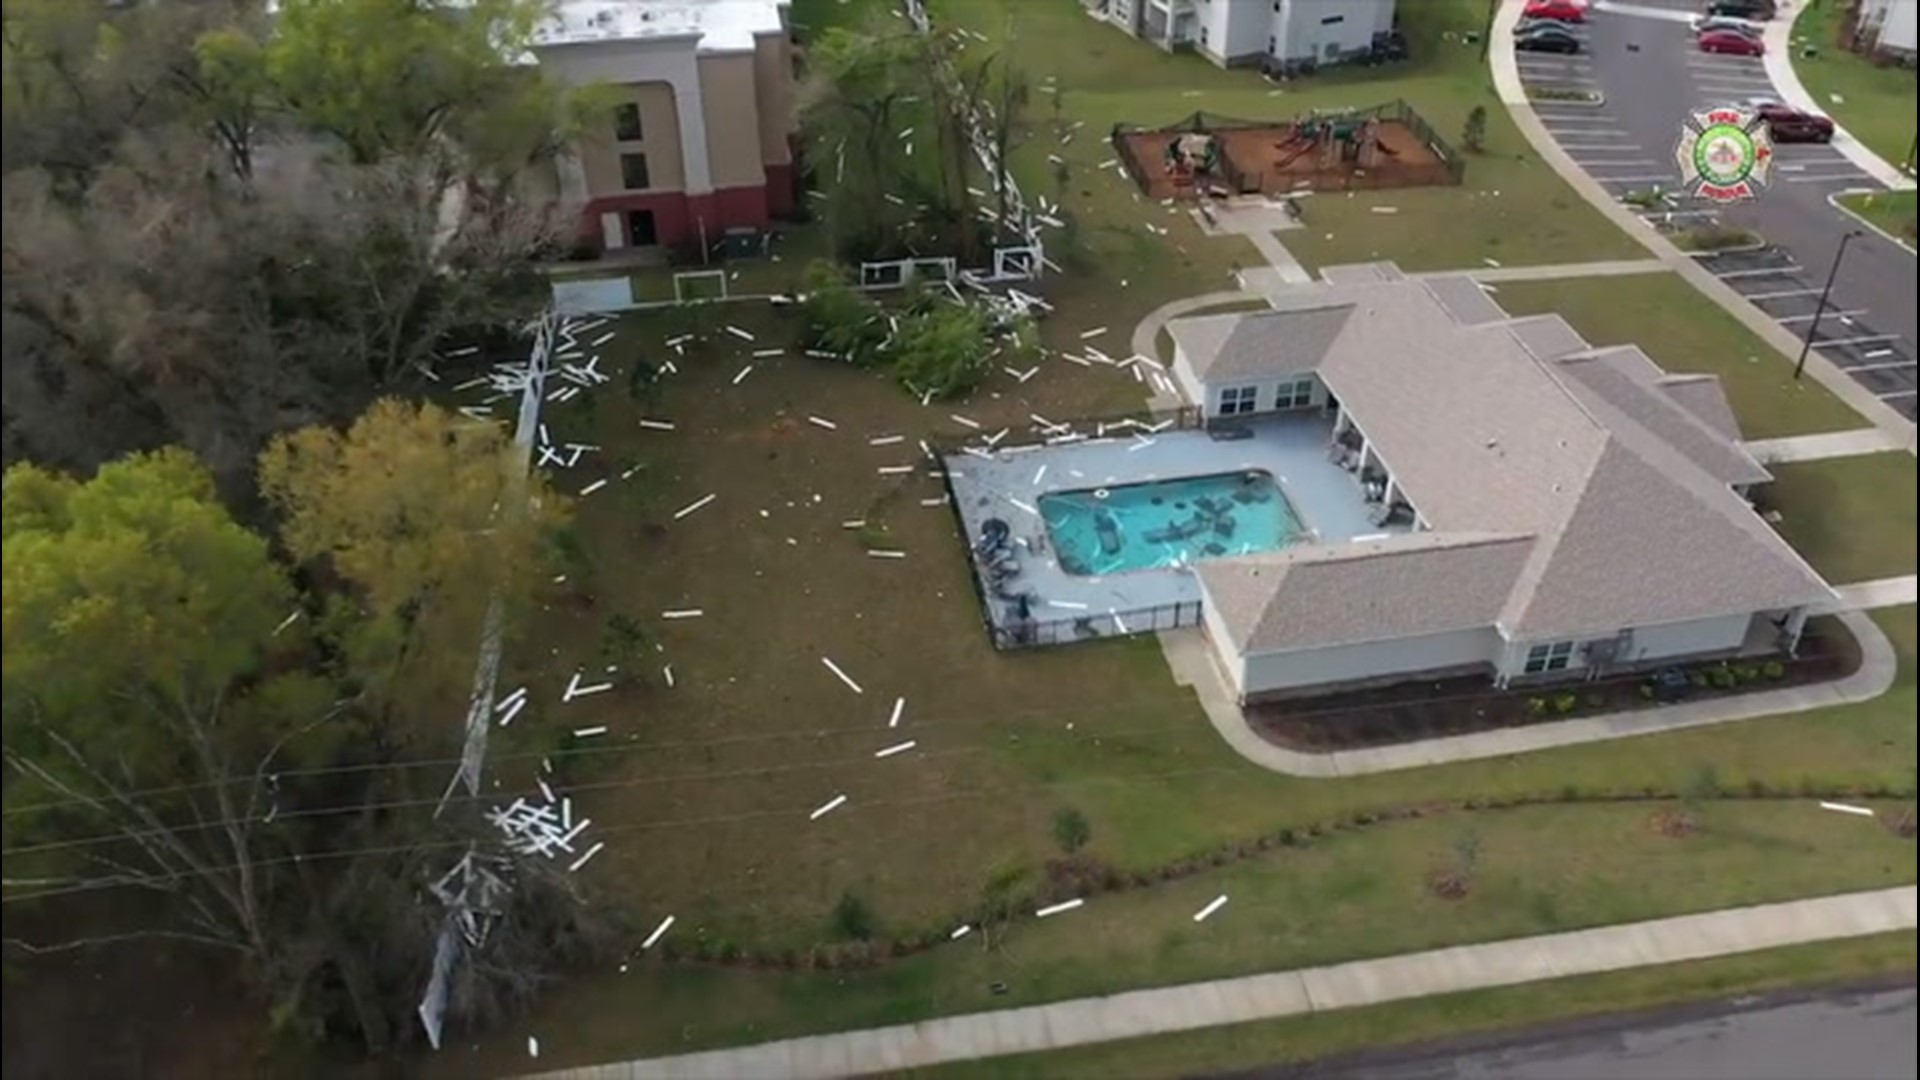 Homes and fences were damaged after a thunderstorm swept through Tampa, Florida, on March 3.